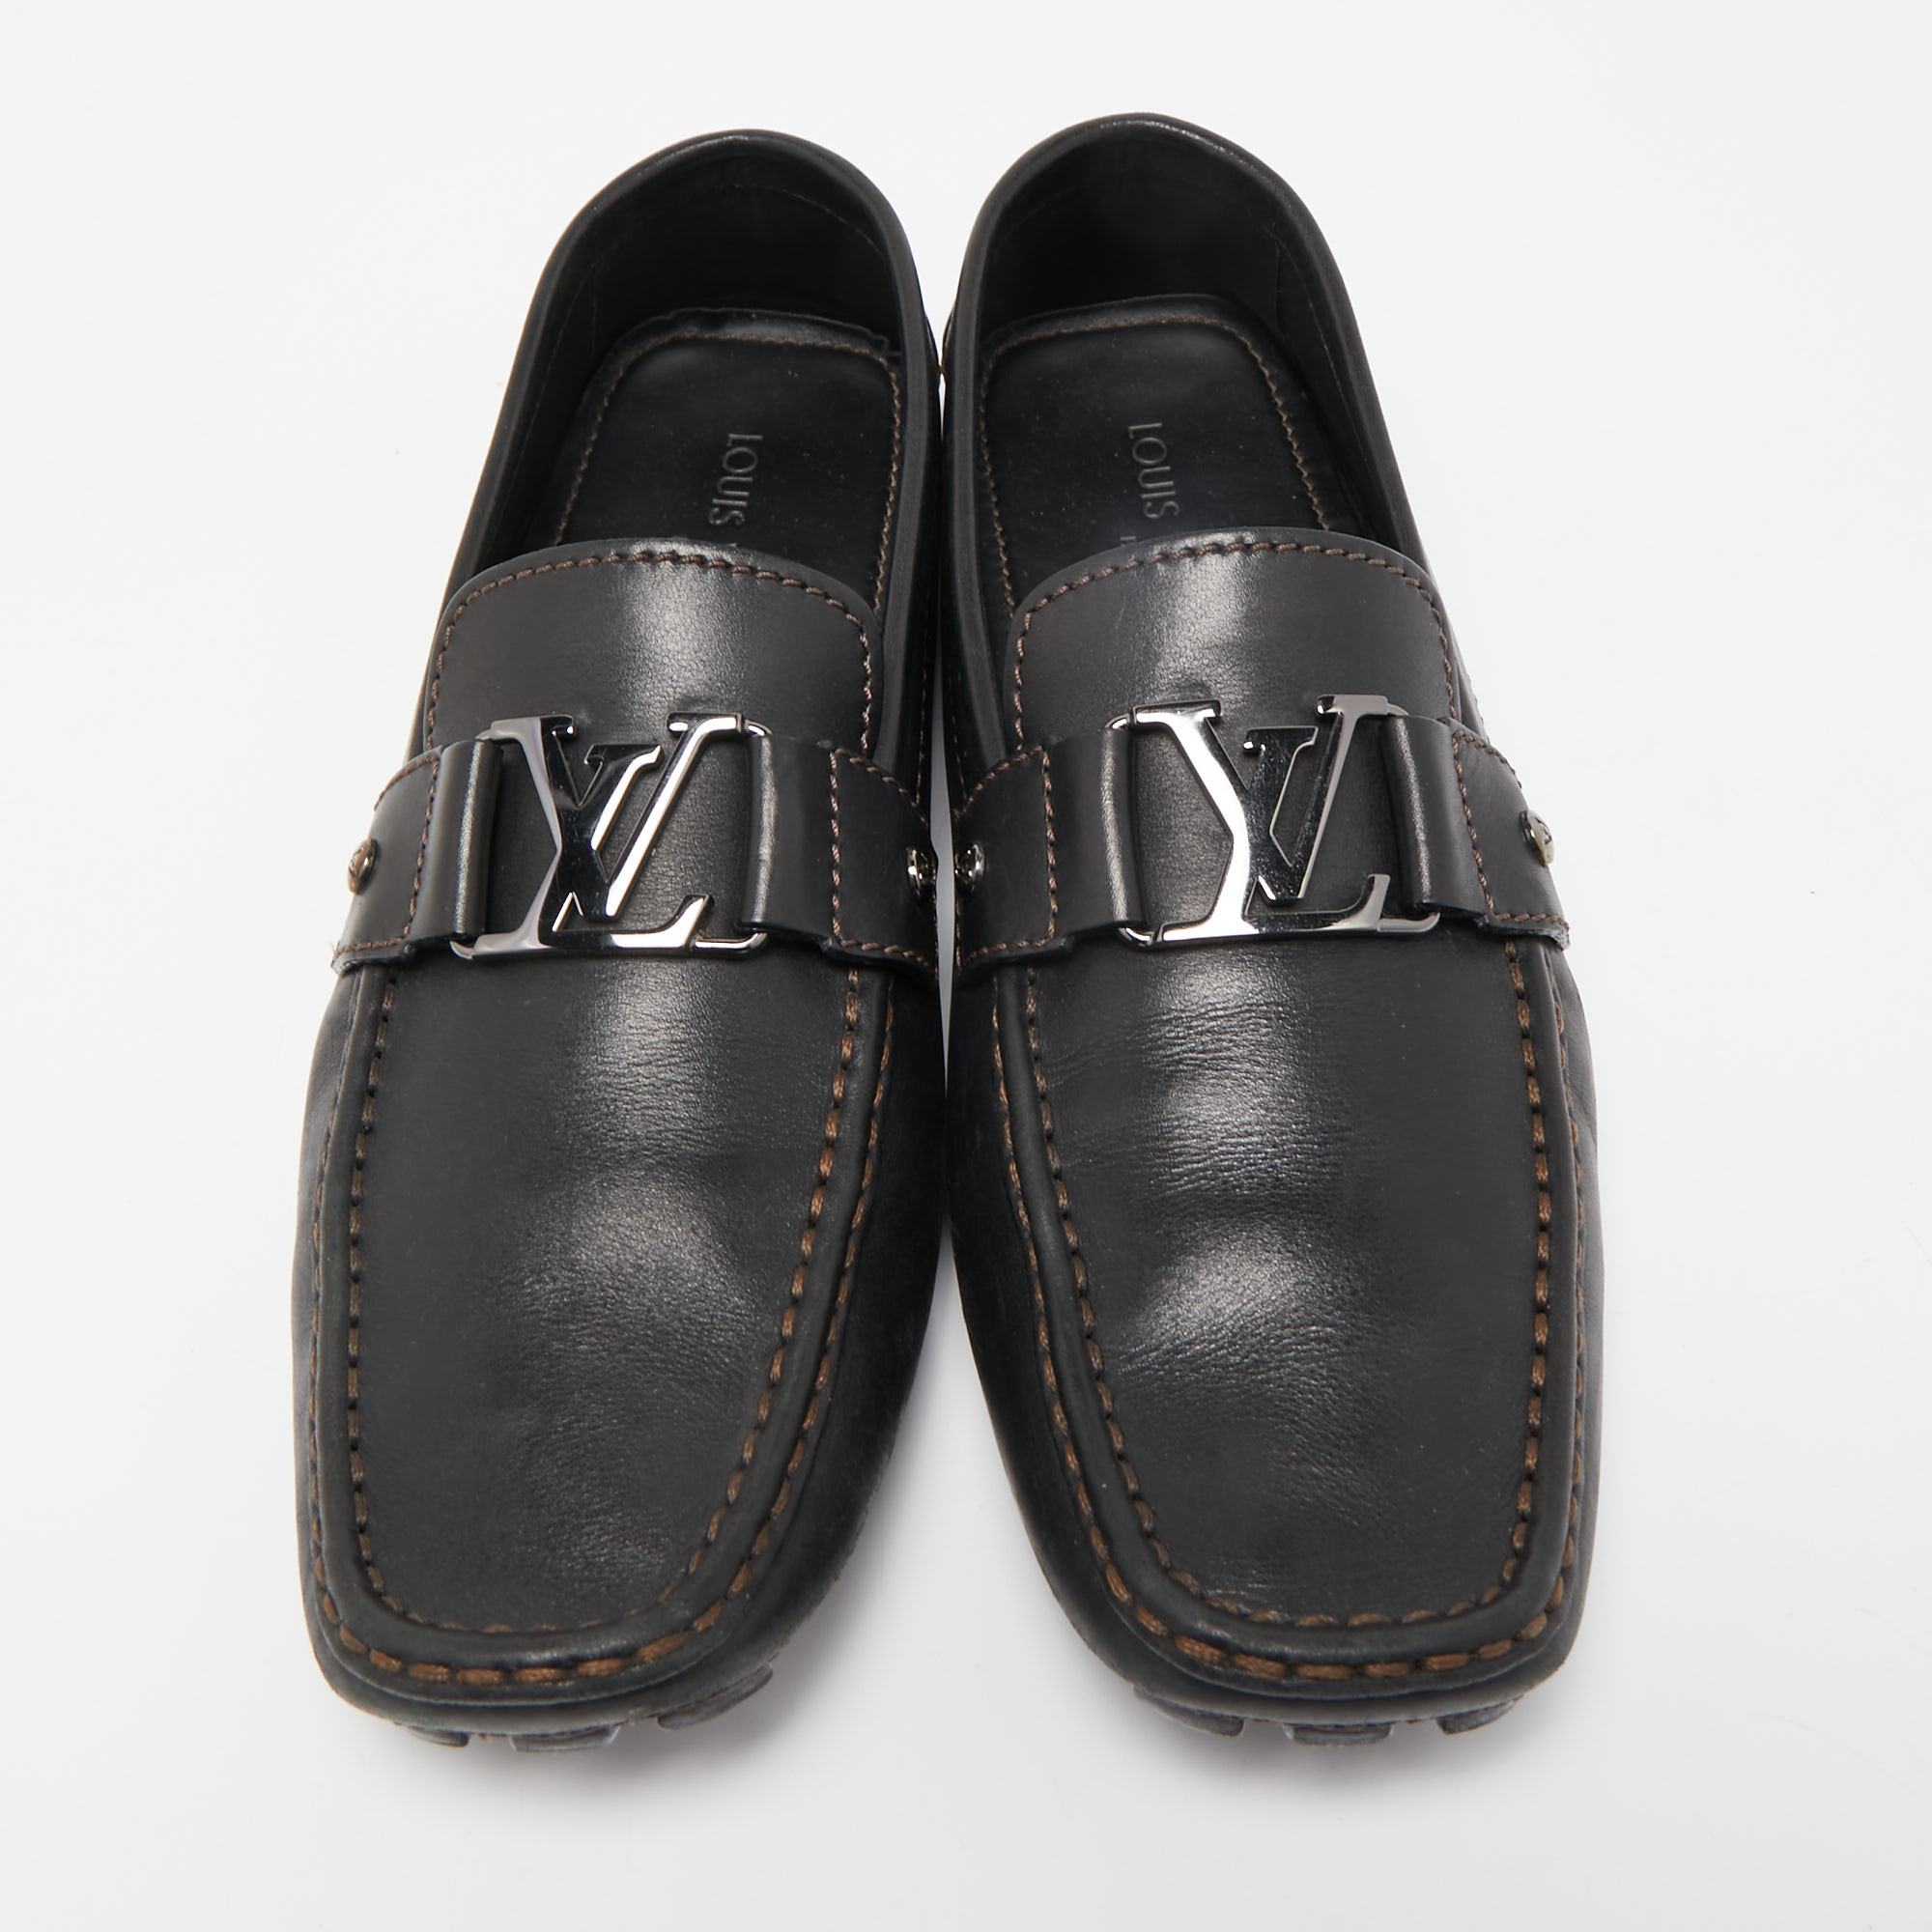 Louis Vuitton Black Leather Monte Carlo Loafers Size 44